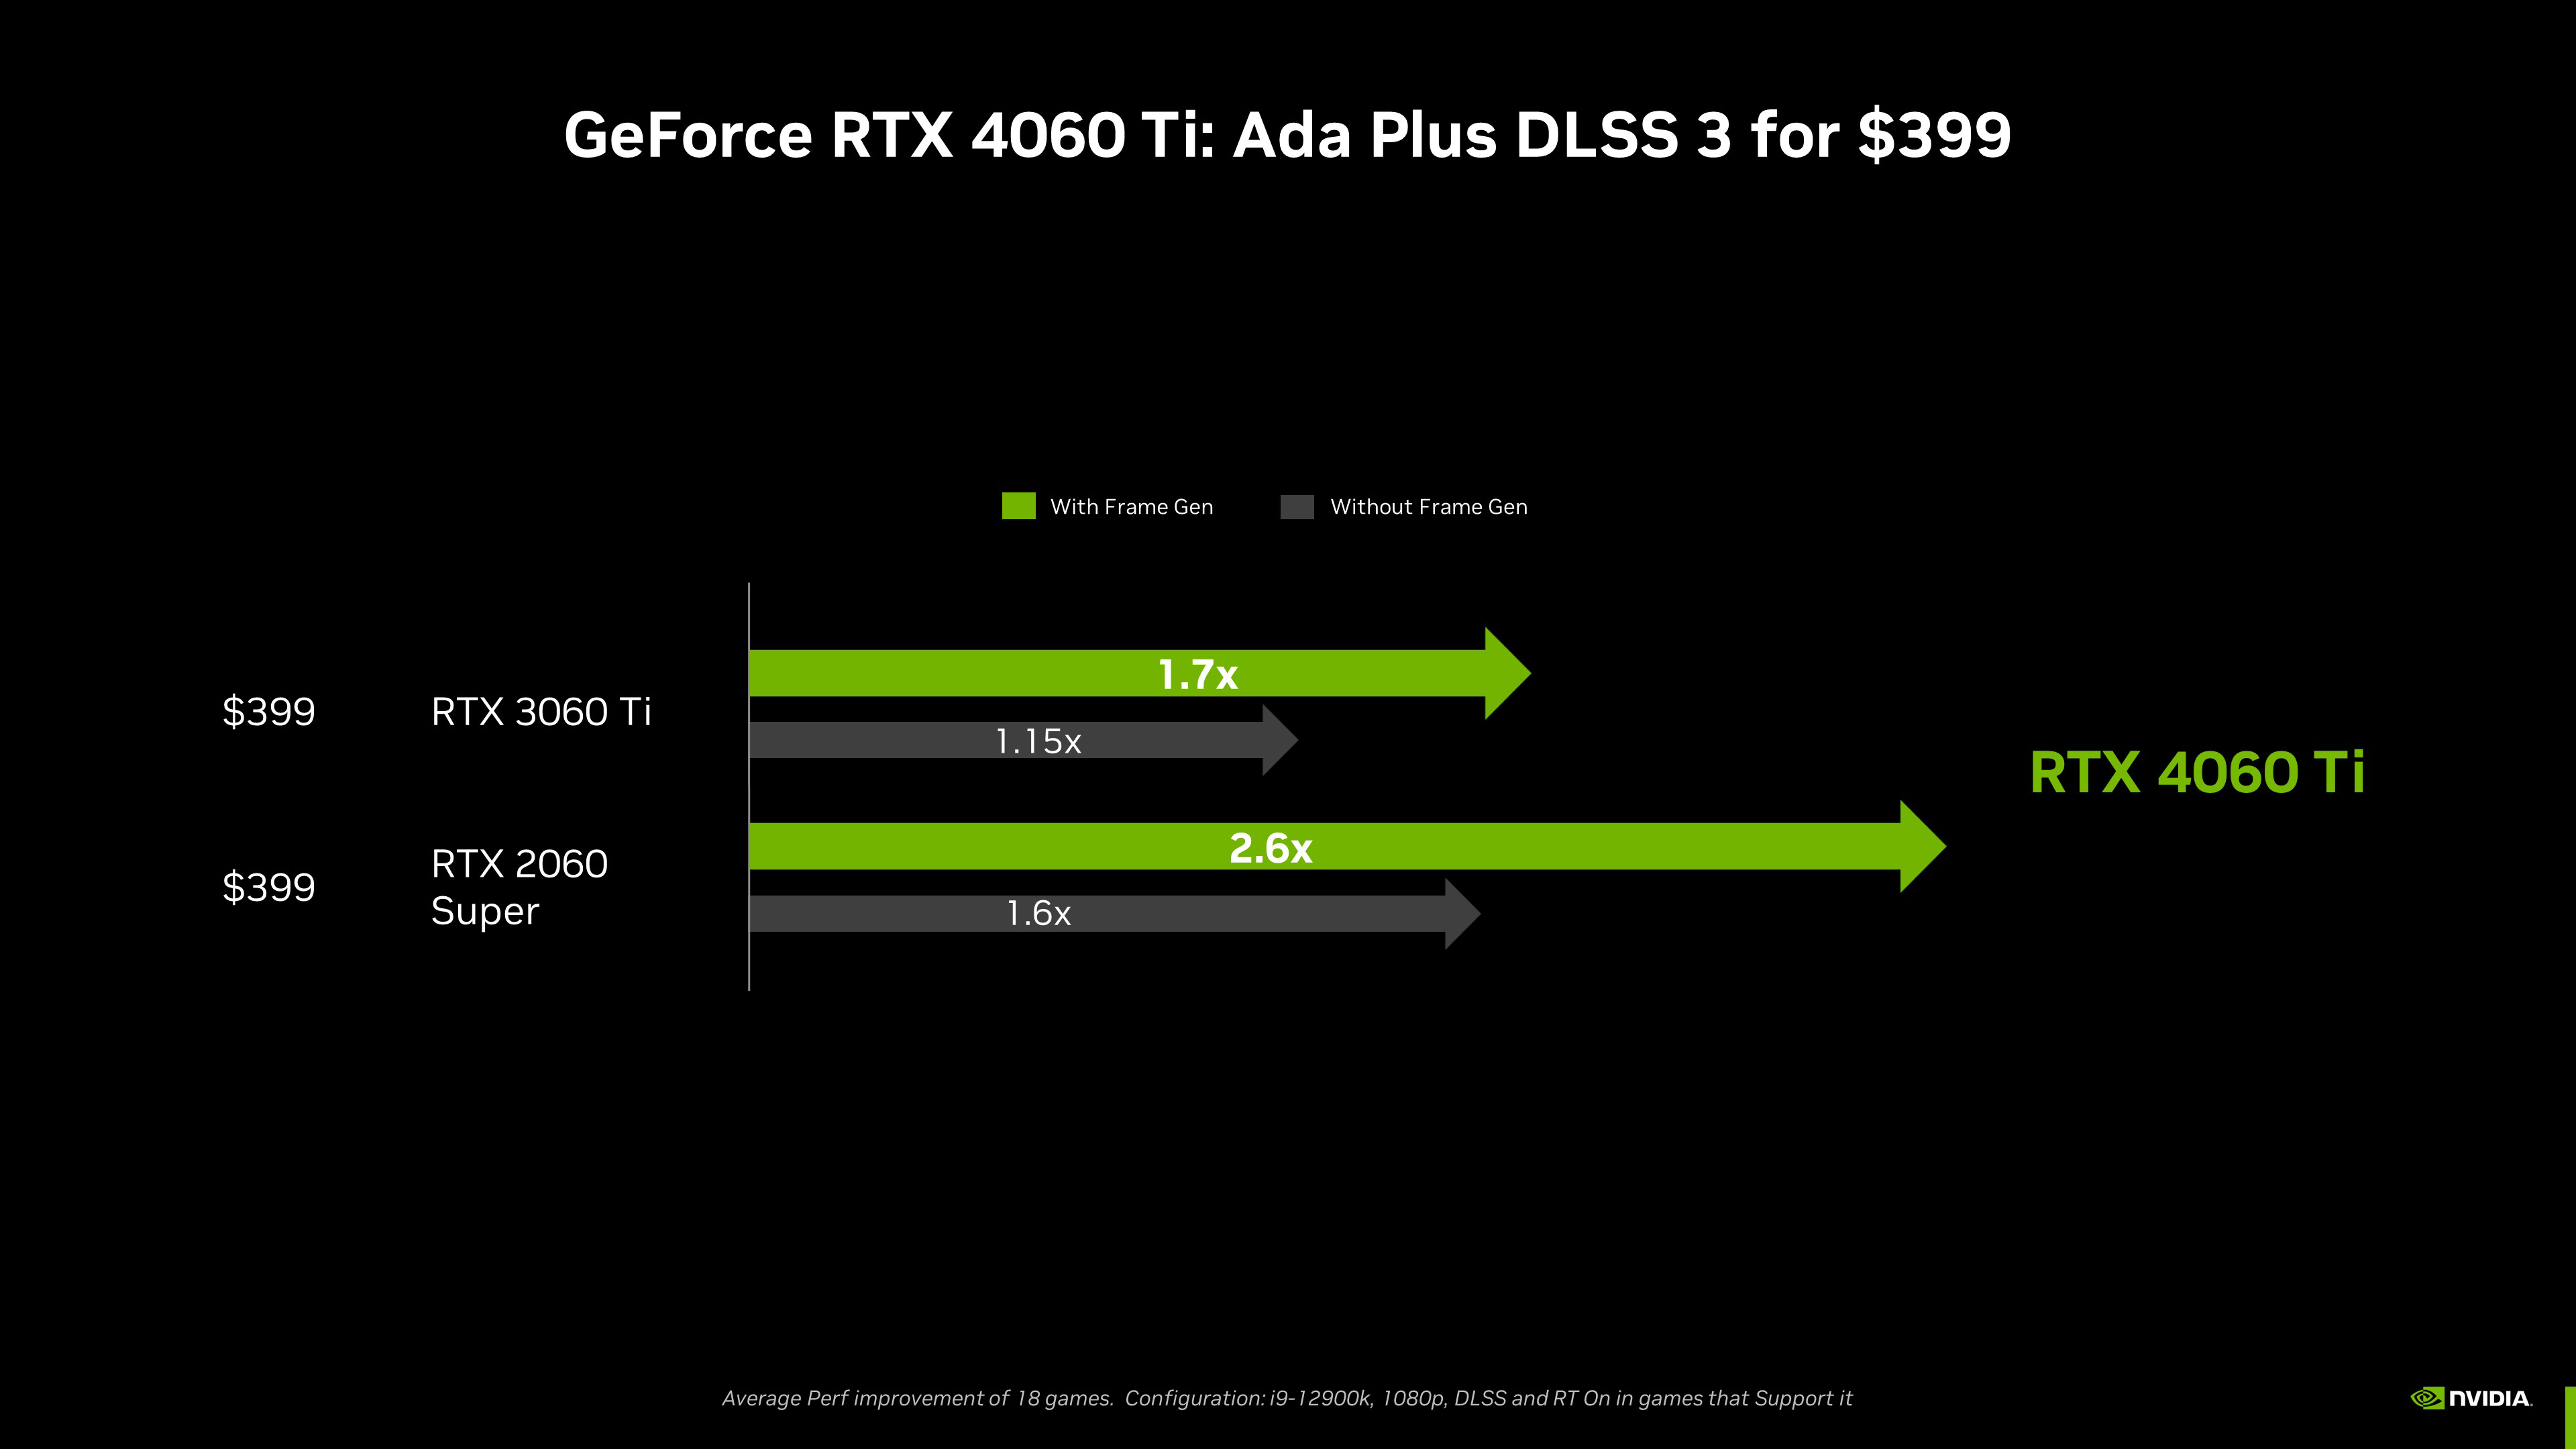 NVIDIA DLSS 3.0 4060 Ti performance over 3060 Ti and 2060 Super